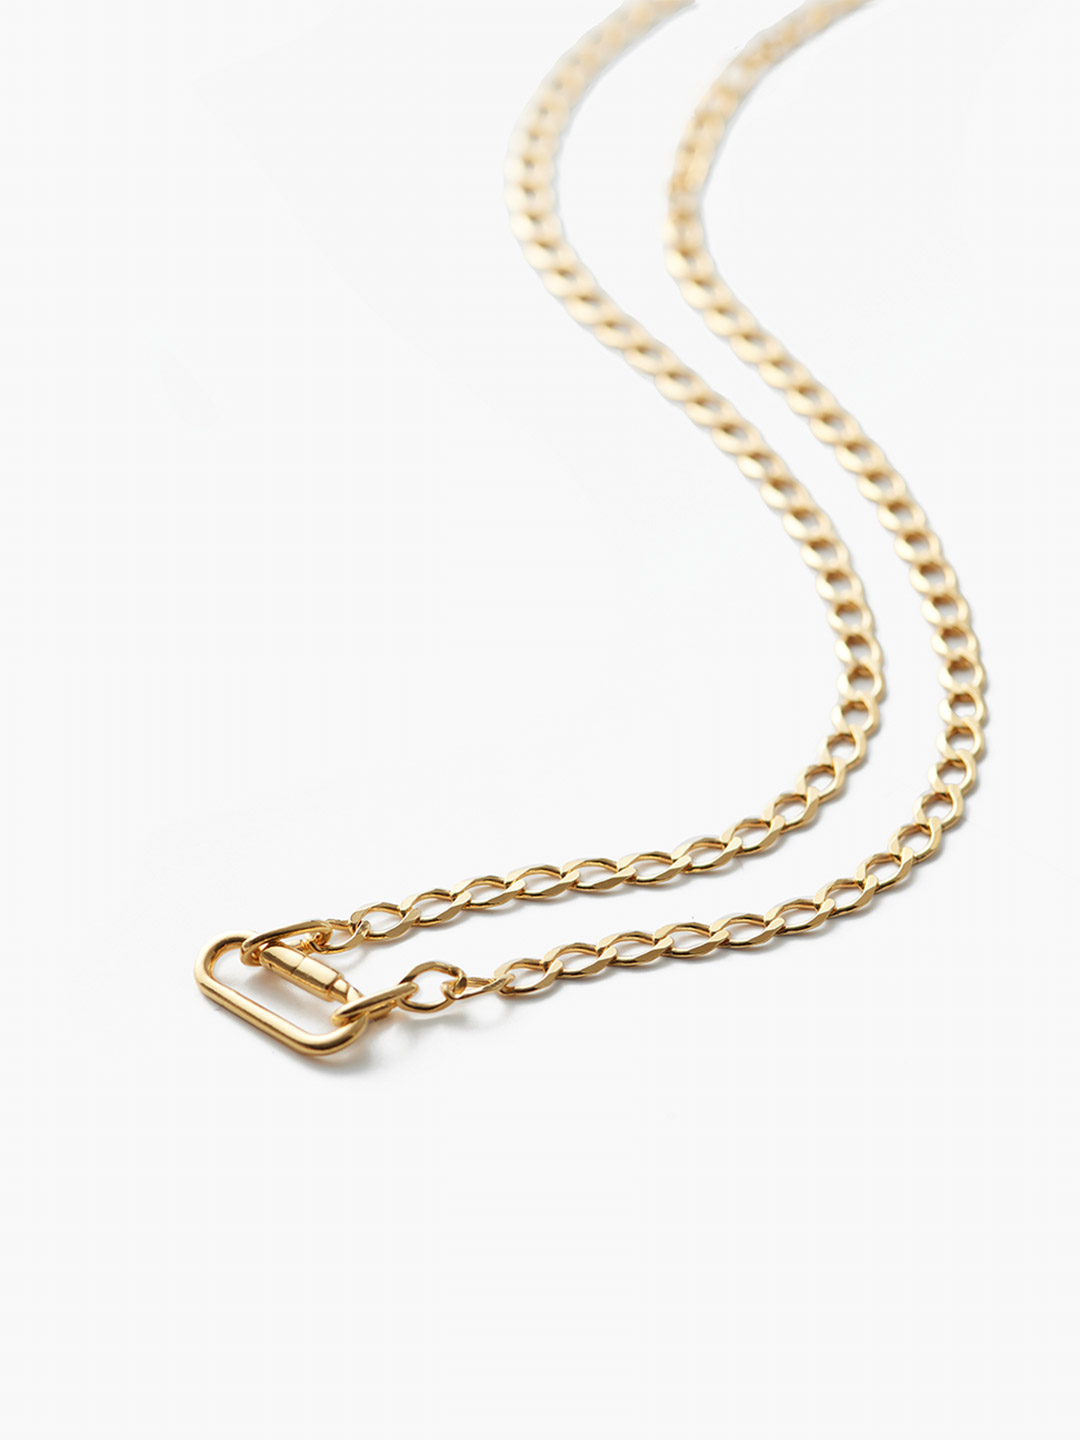 Nordhavn 55 Necklace - Yellow Gold